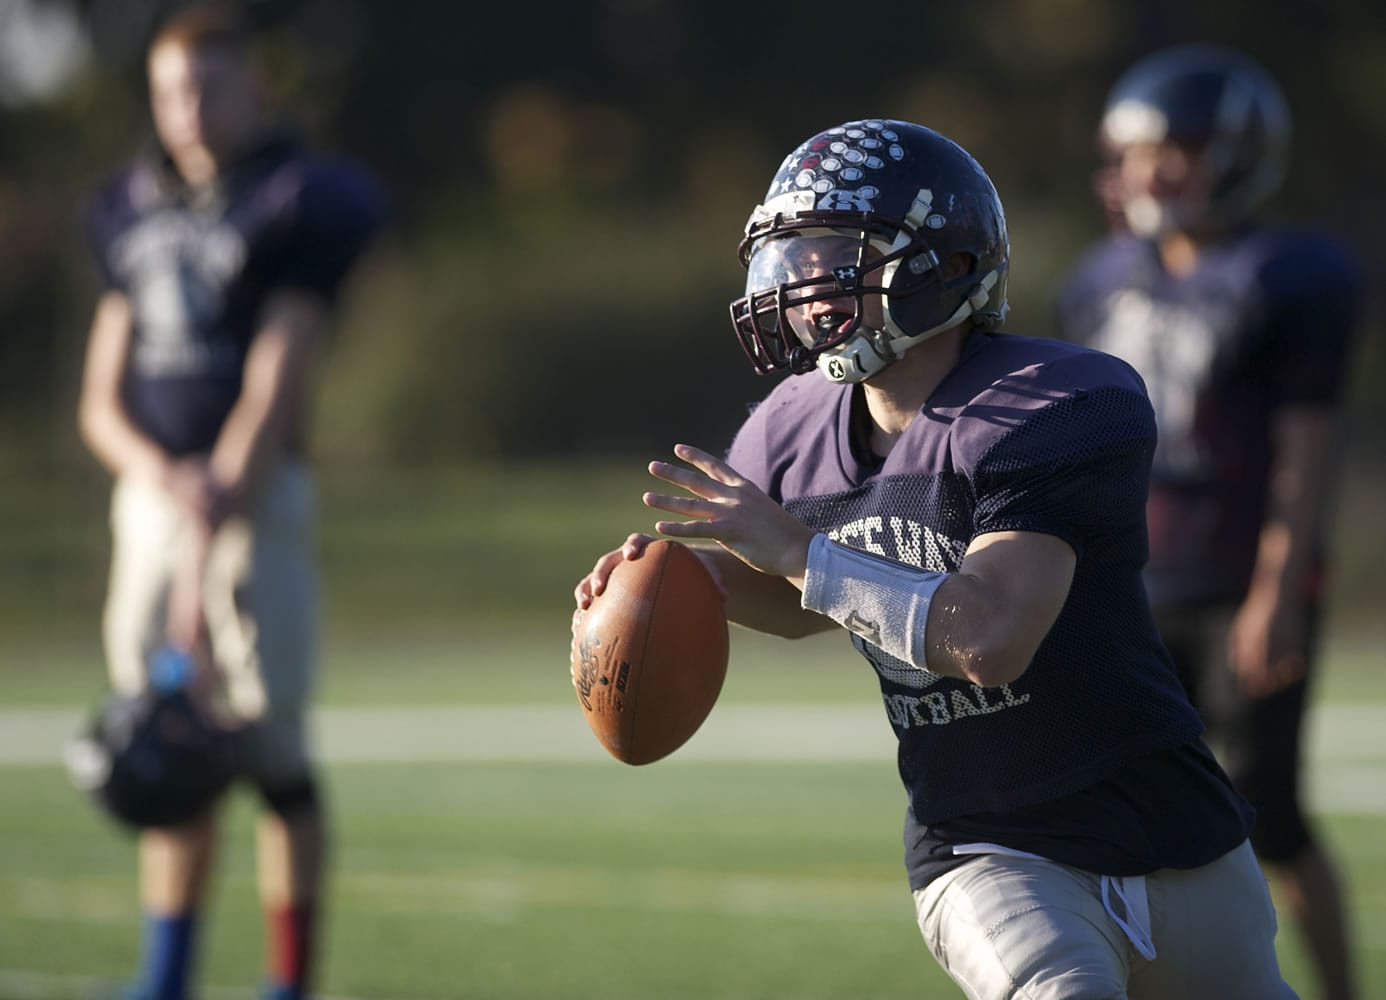 King's Way Christian standout Jay Becker looks to throw the ball during practice on Thursday.